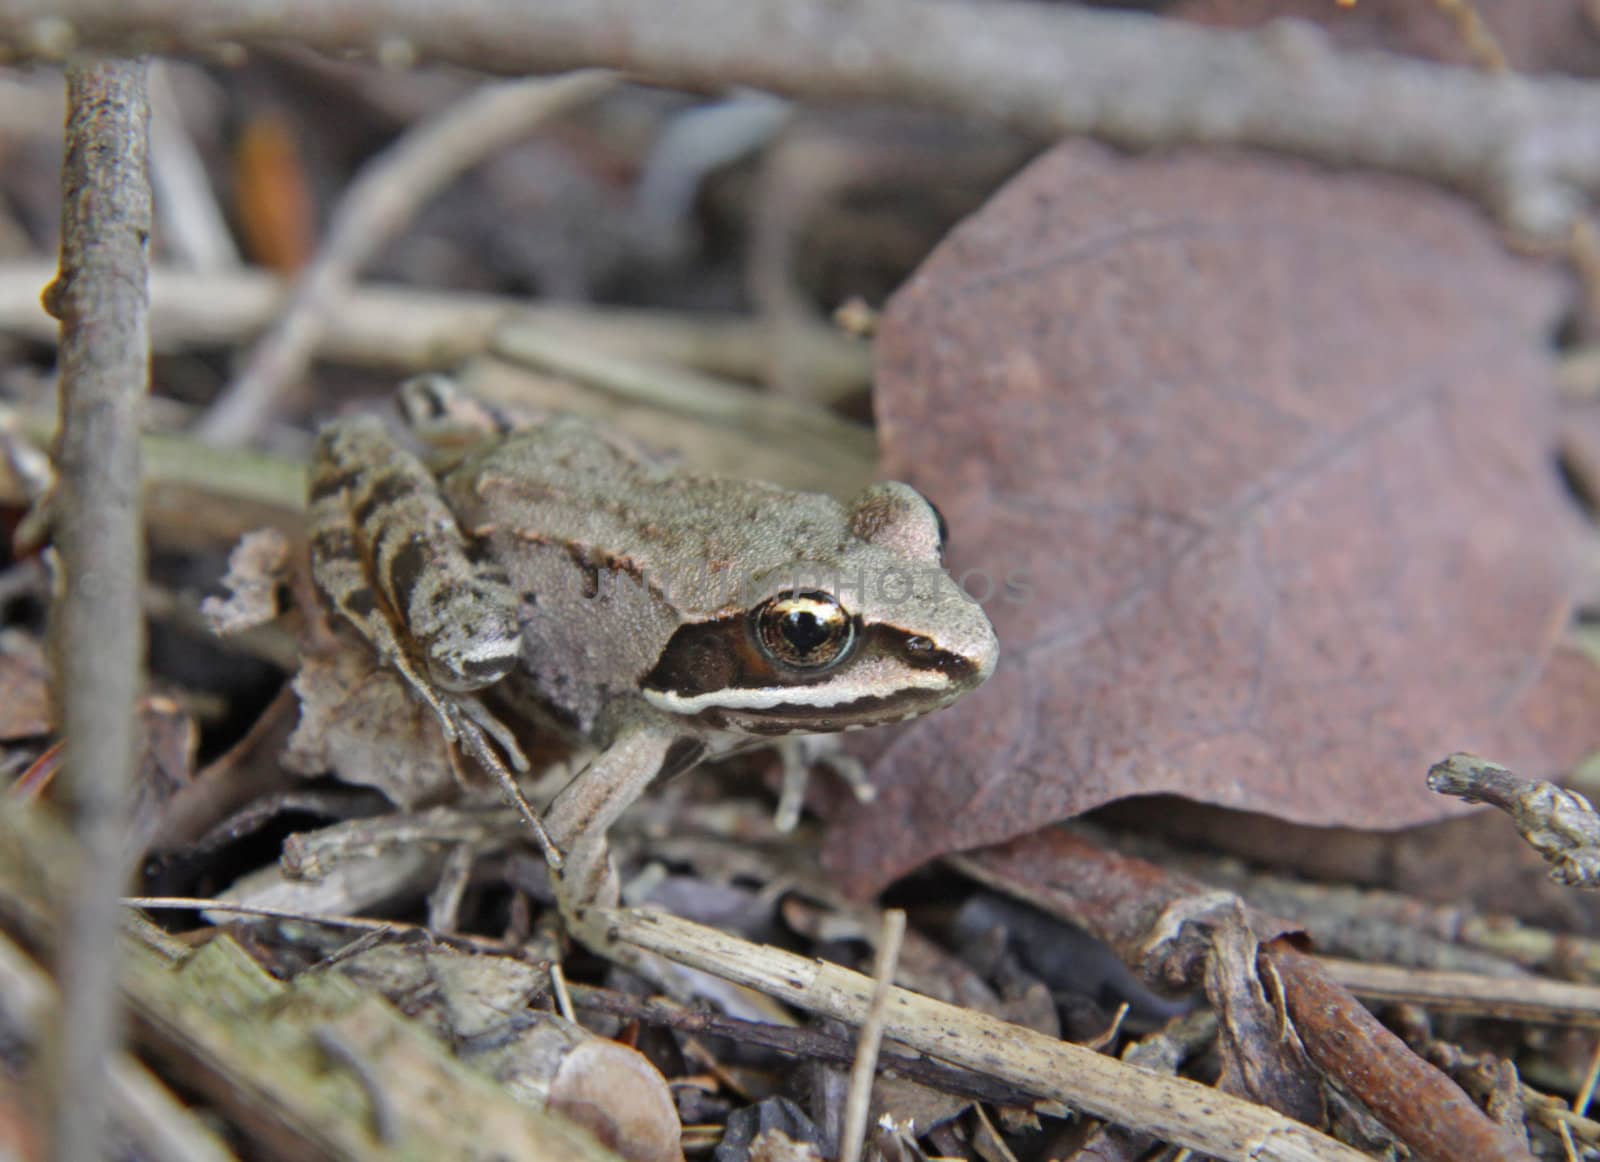 A Wood Frog (Rana sylvatica) on the floor of the forest.
